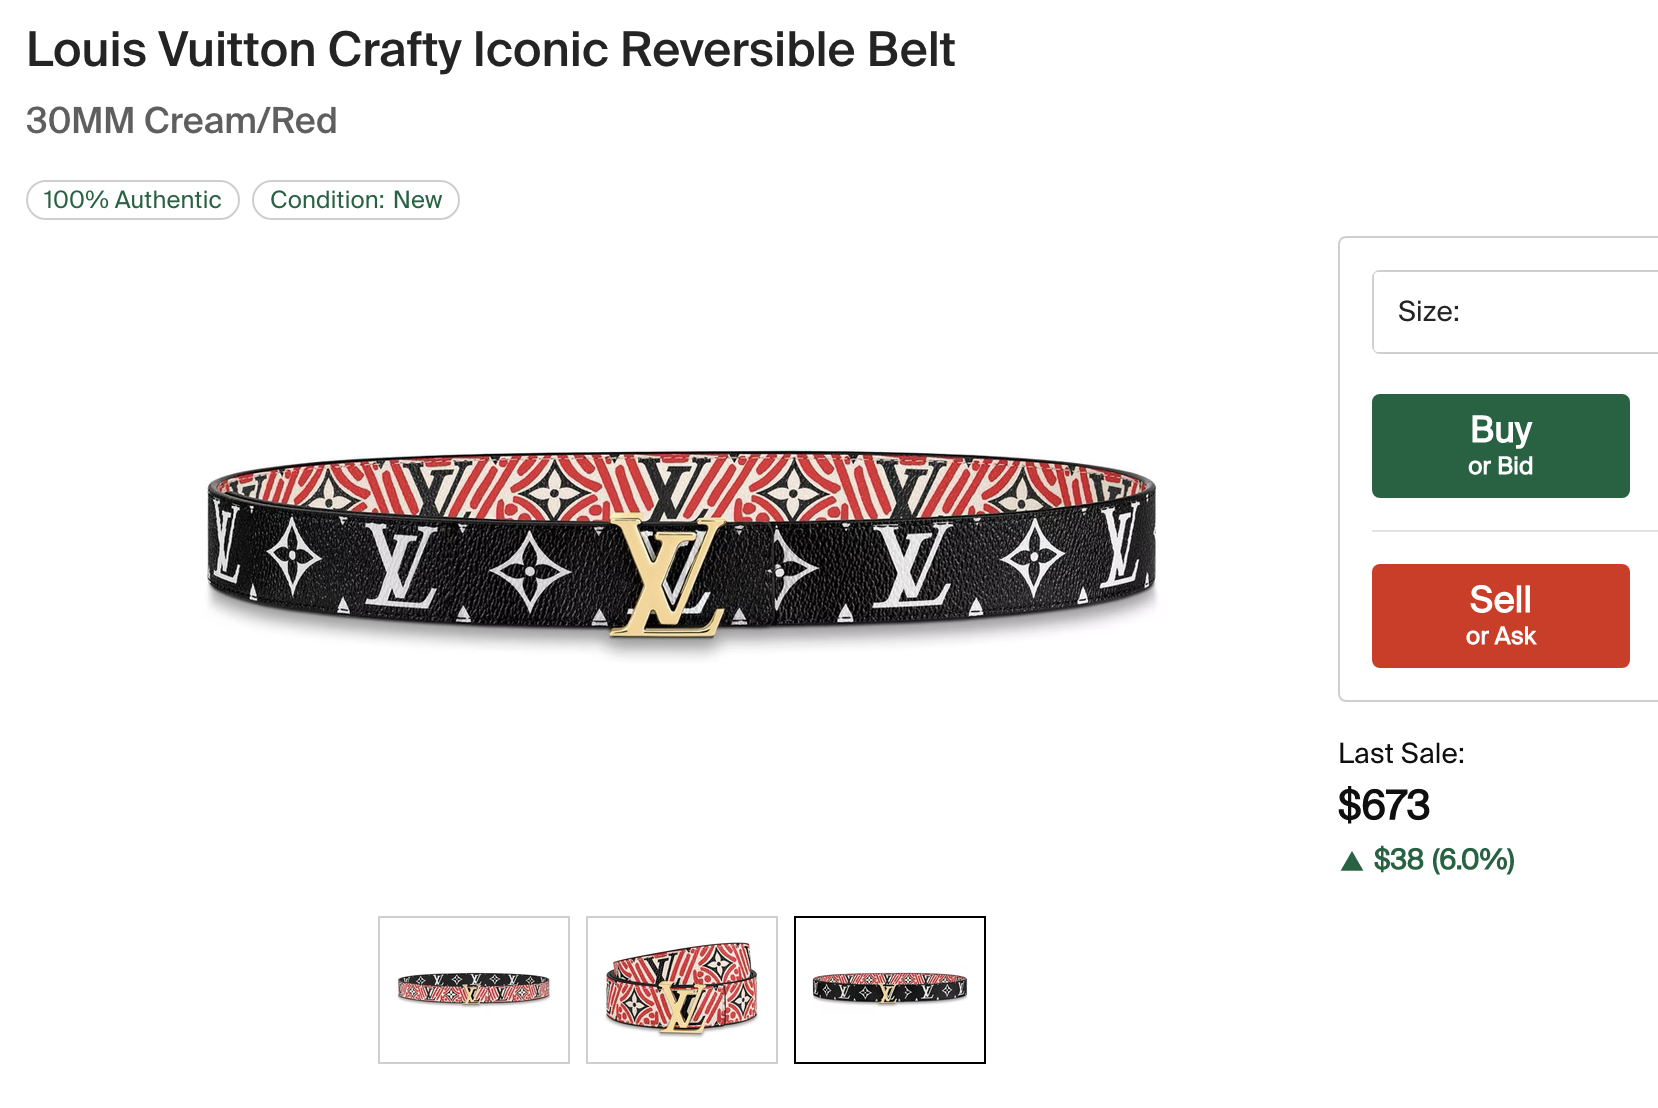 Louis Vuitton Crafty Iconic Reversible Belt 30MM Cream/Red in